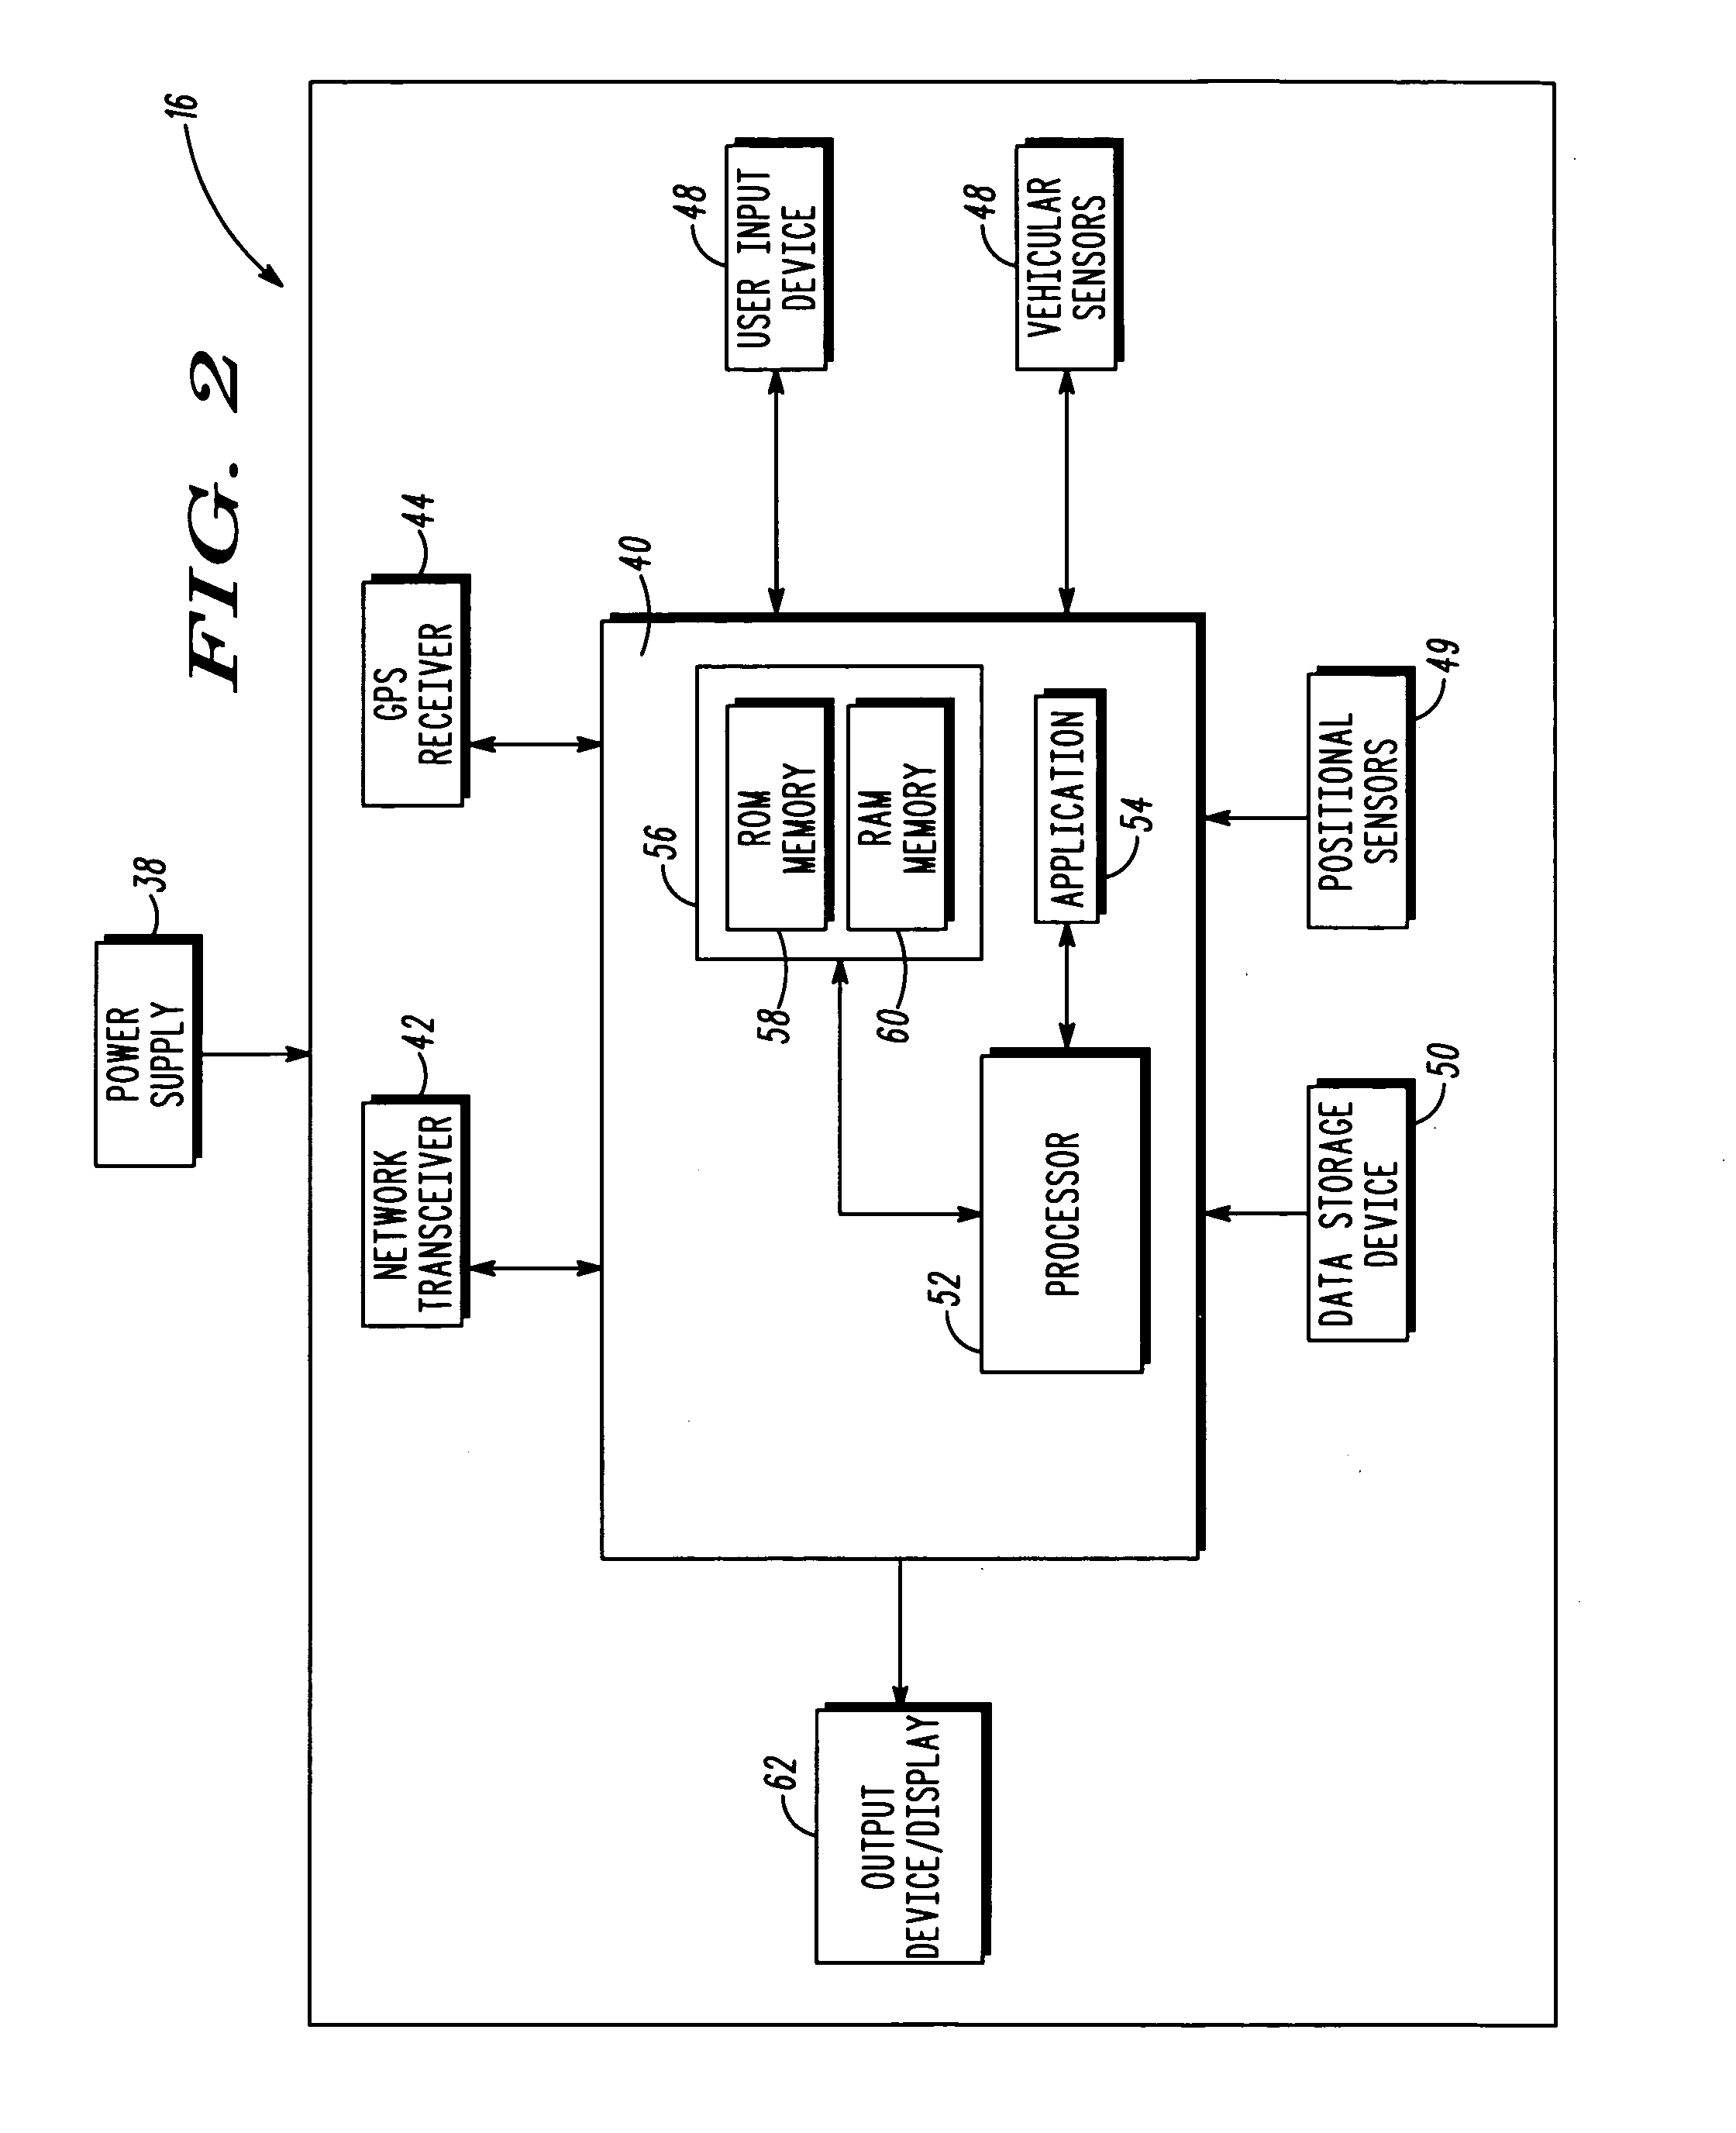 Method and apparatus for obtaining and providing information related to a point-of-interest